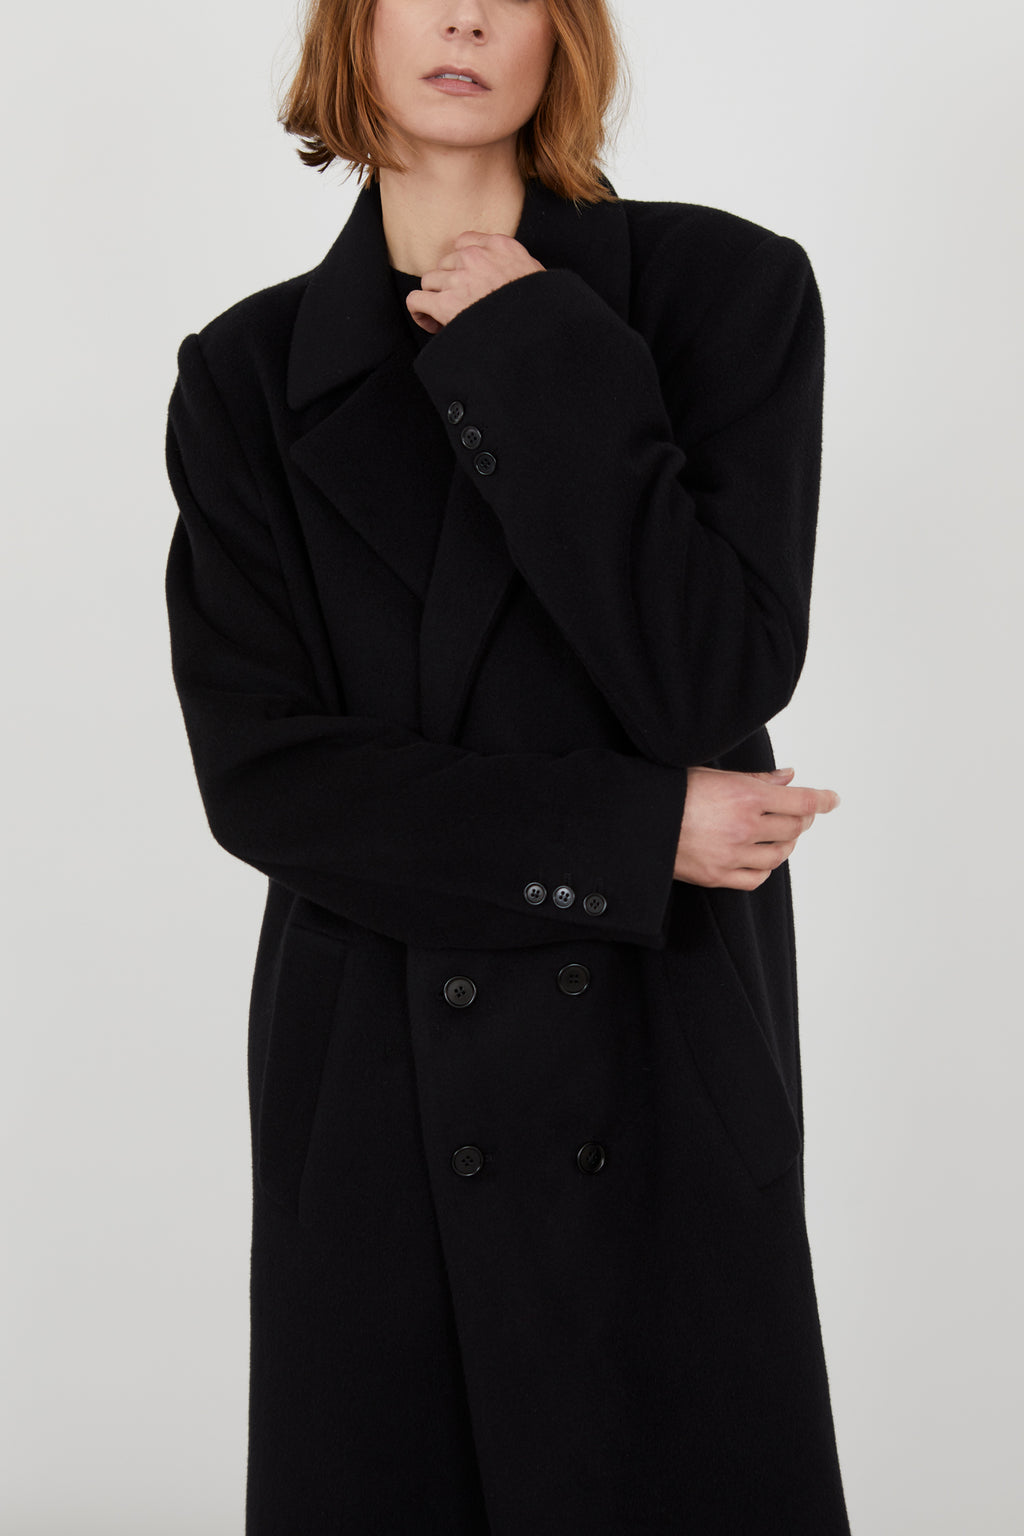 A person wearing a black cashmere coat. Focus on the buttons